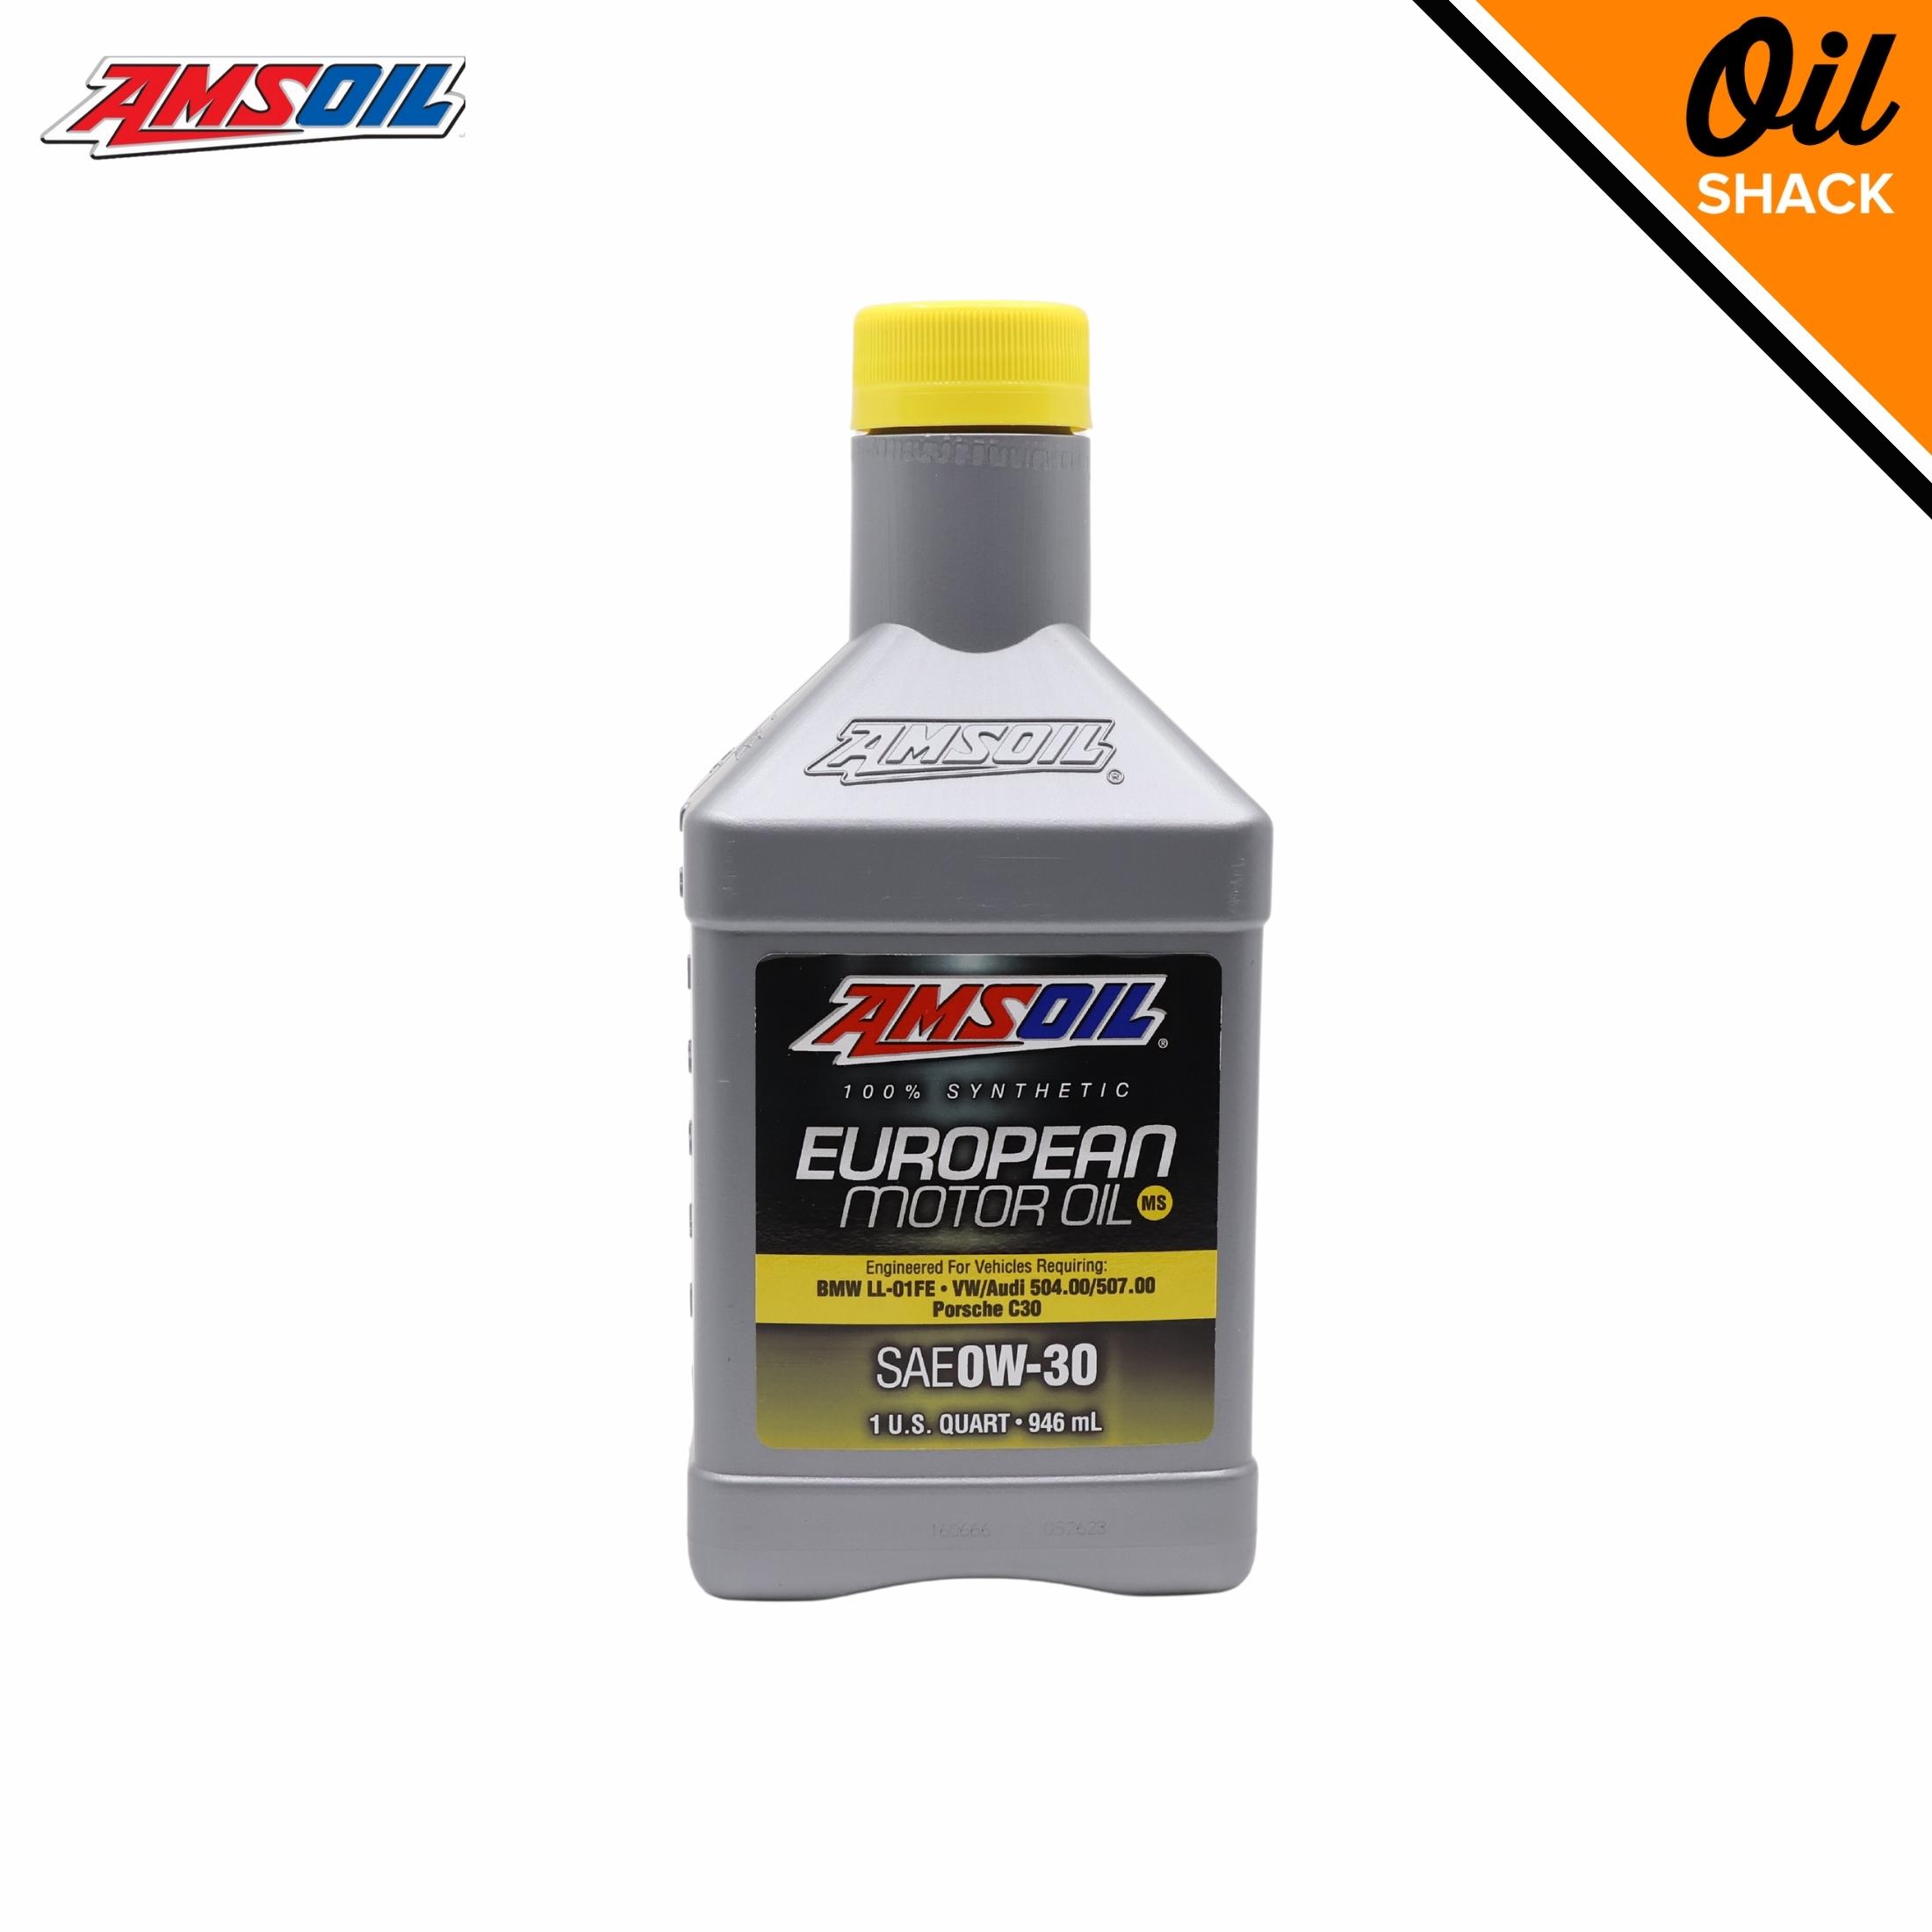 AMSOIL Signature Series Synthetic 0W-30 Motor Oil